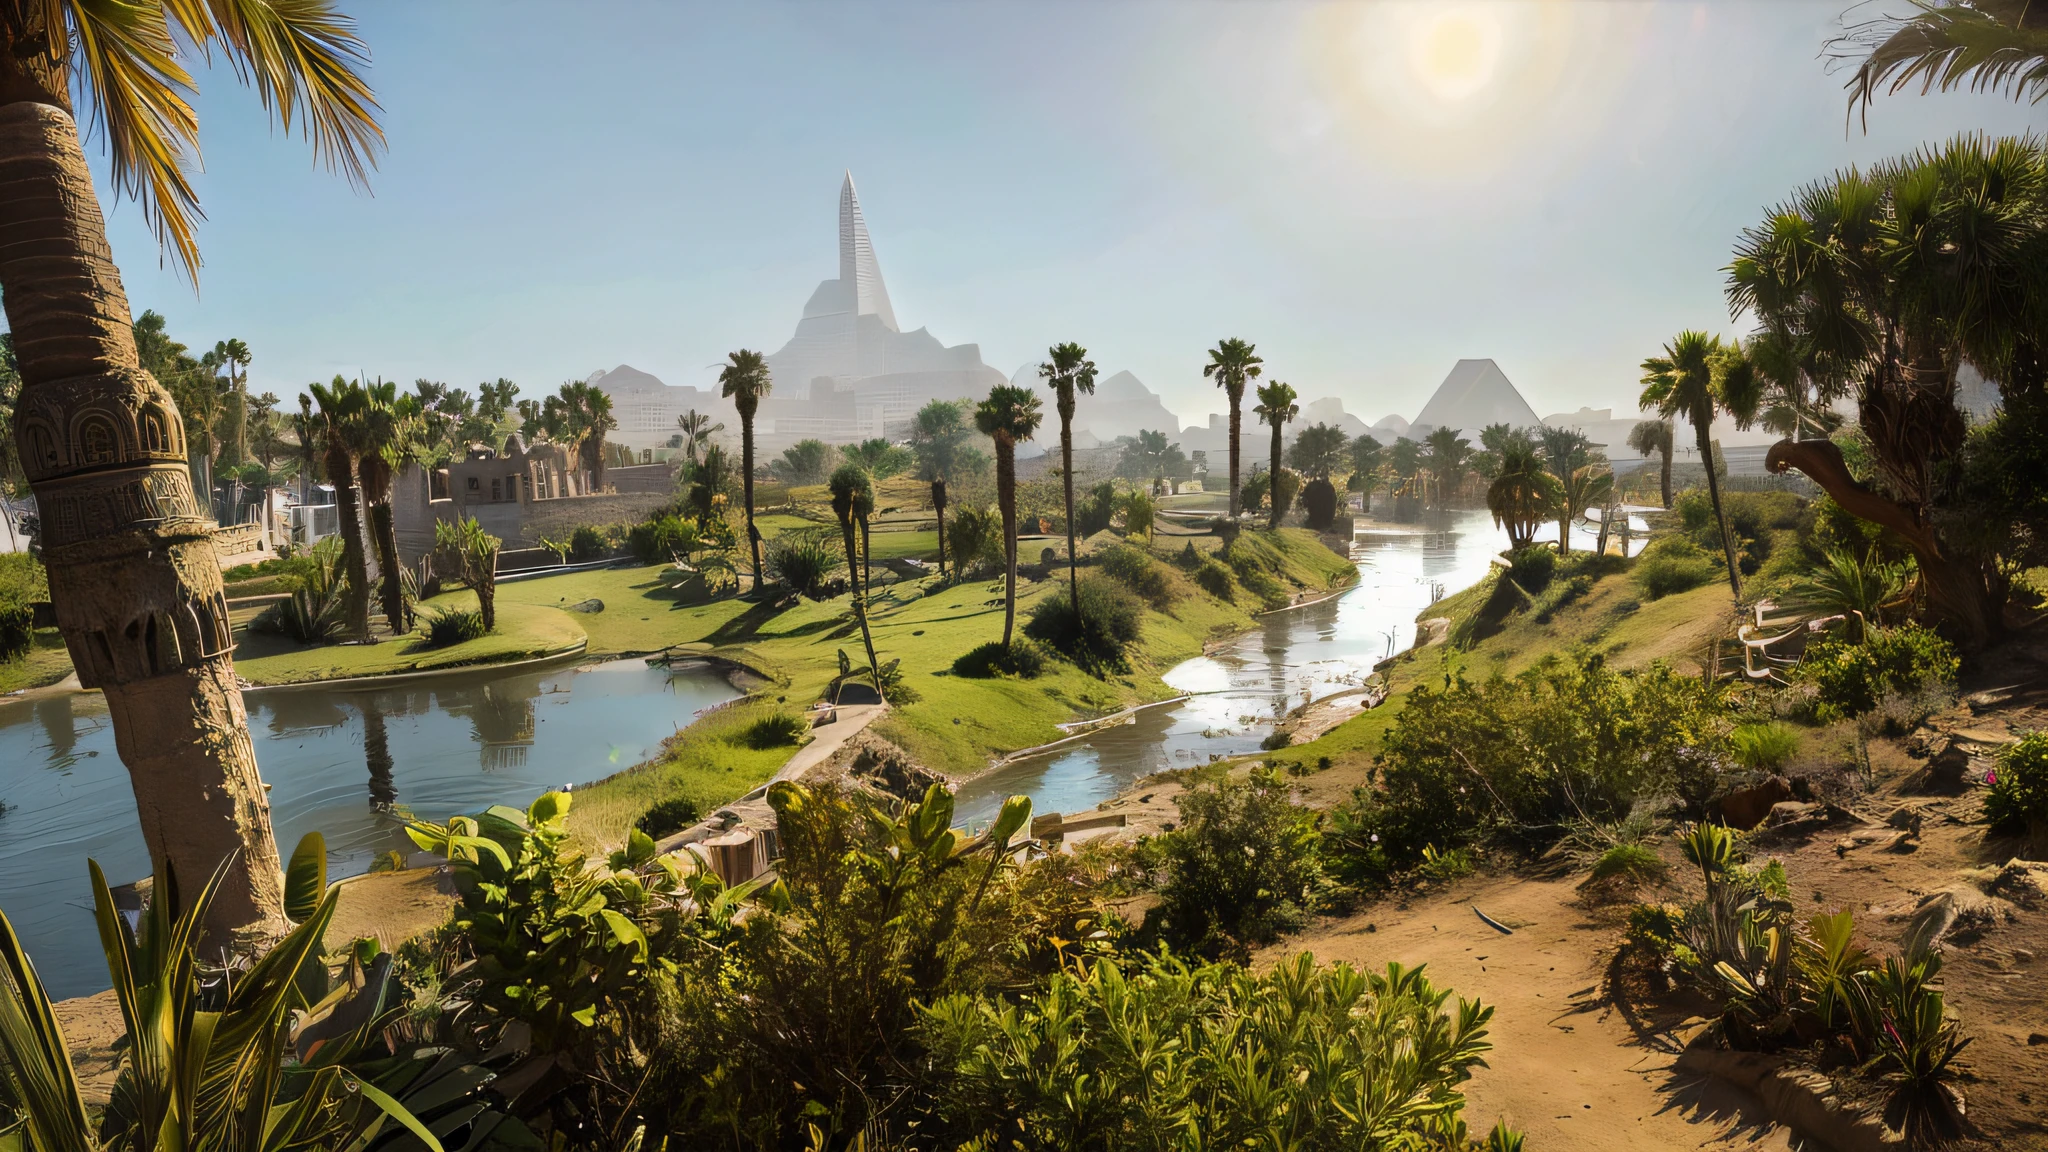 There is a large body of water，There are dinosaurs inside, egyptian environment, Egyptian landscape, nile river environment, Colorful ancient Egyptian city, egyption, Egyptian atmosphere, oasis in the desert, beautiful high resolution, ancient cyberpunk 8k resolution, lush oasis, epic landscapes, The colorful city of ancient Egypt, author：Harold von Schmidt, In the desert oasis lake